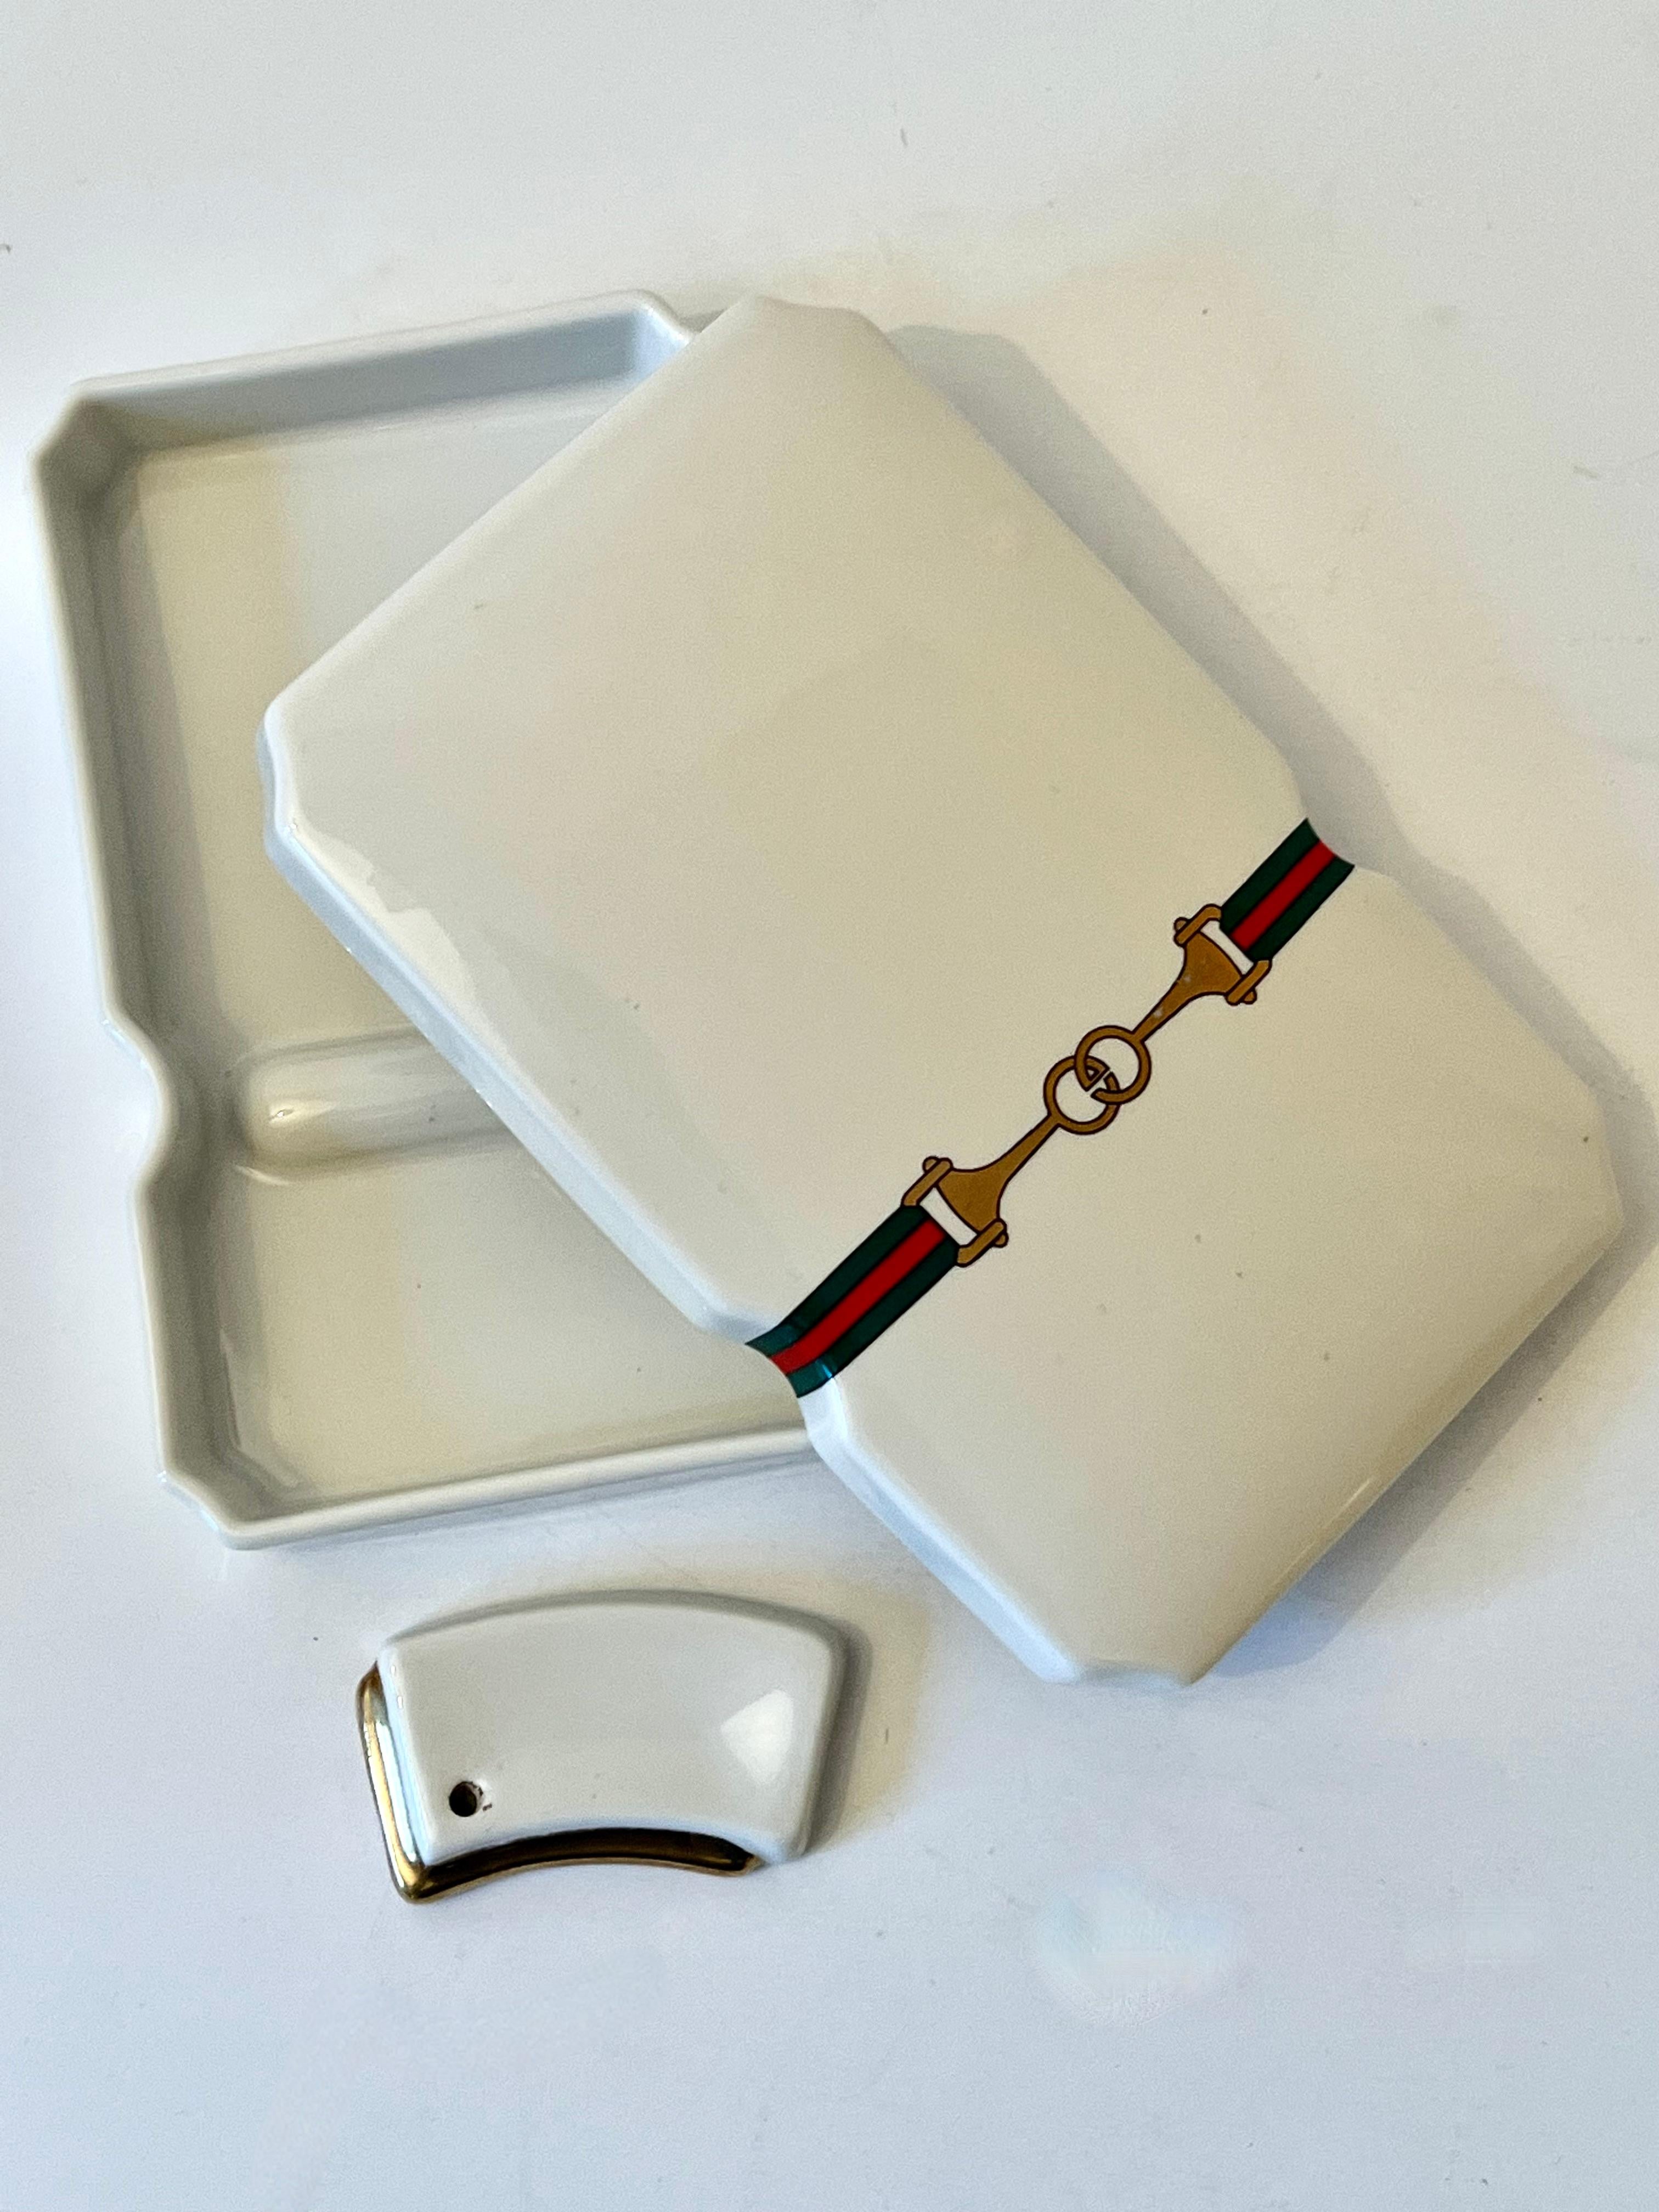 20th Century Porcelain Gucci Lidded Box with Incense 420 Holder For Sale